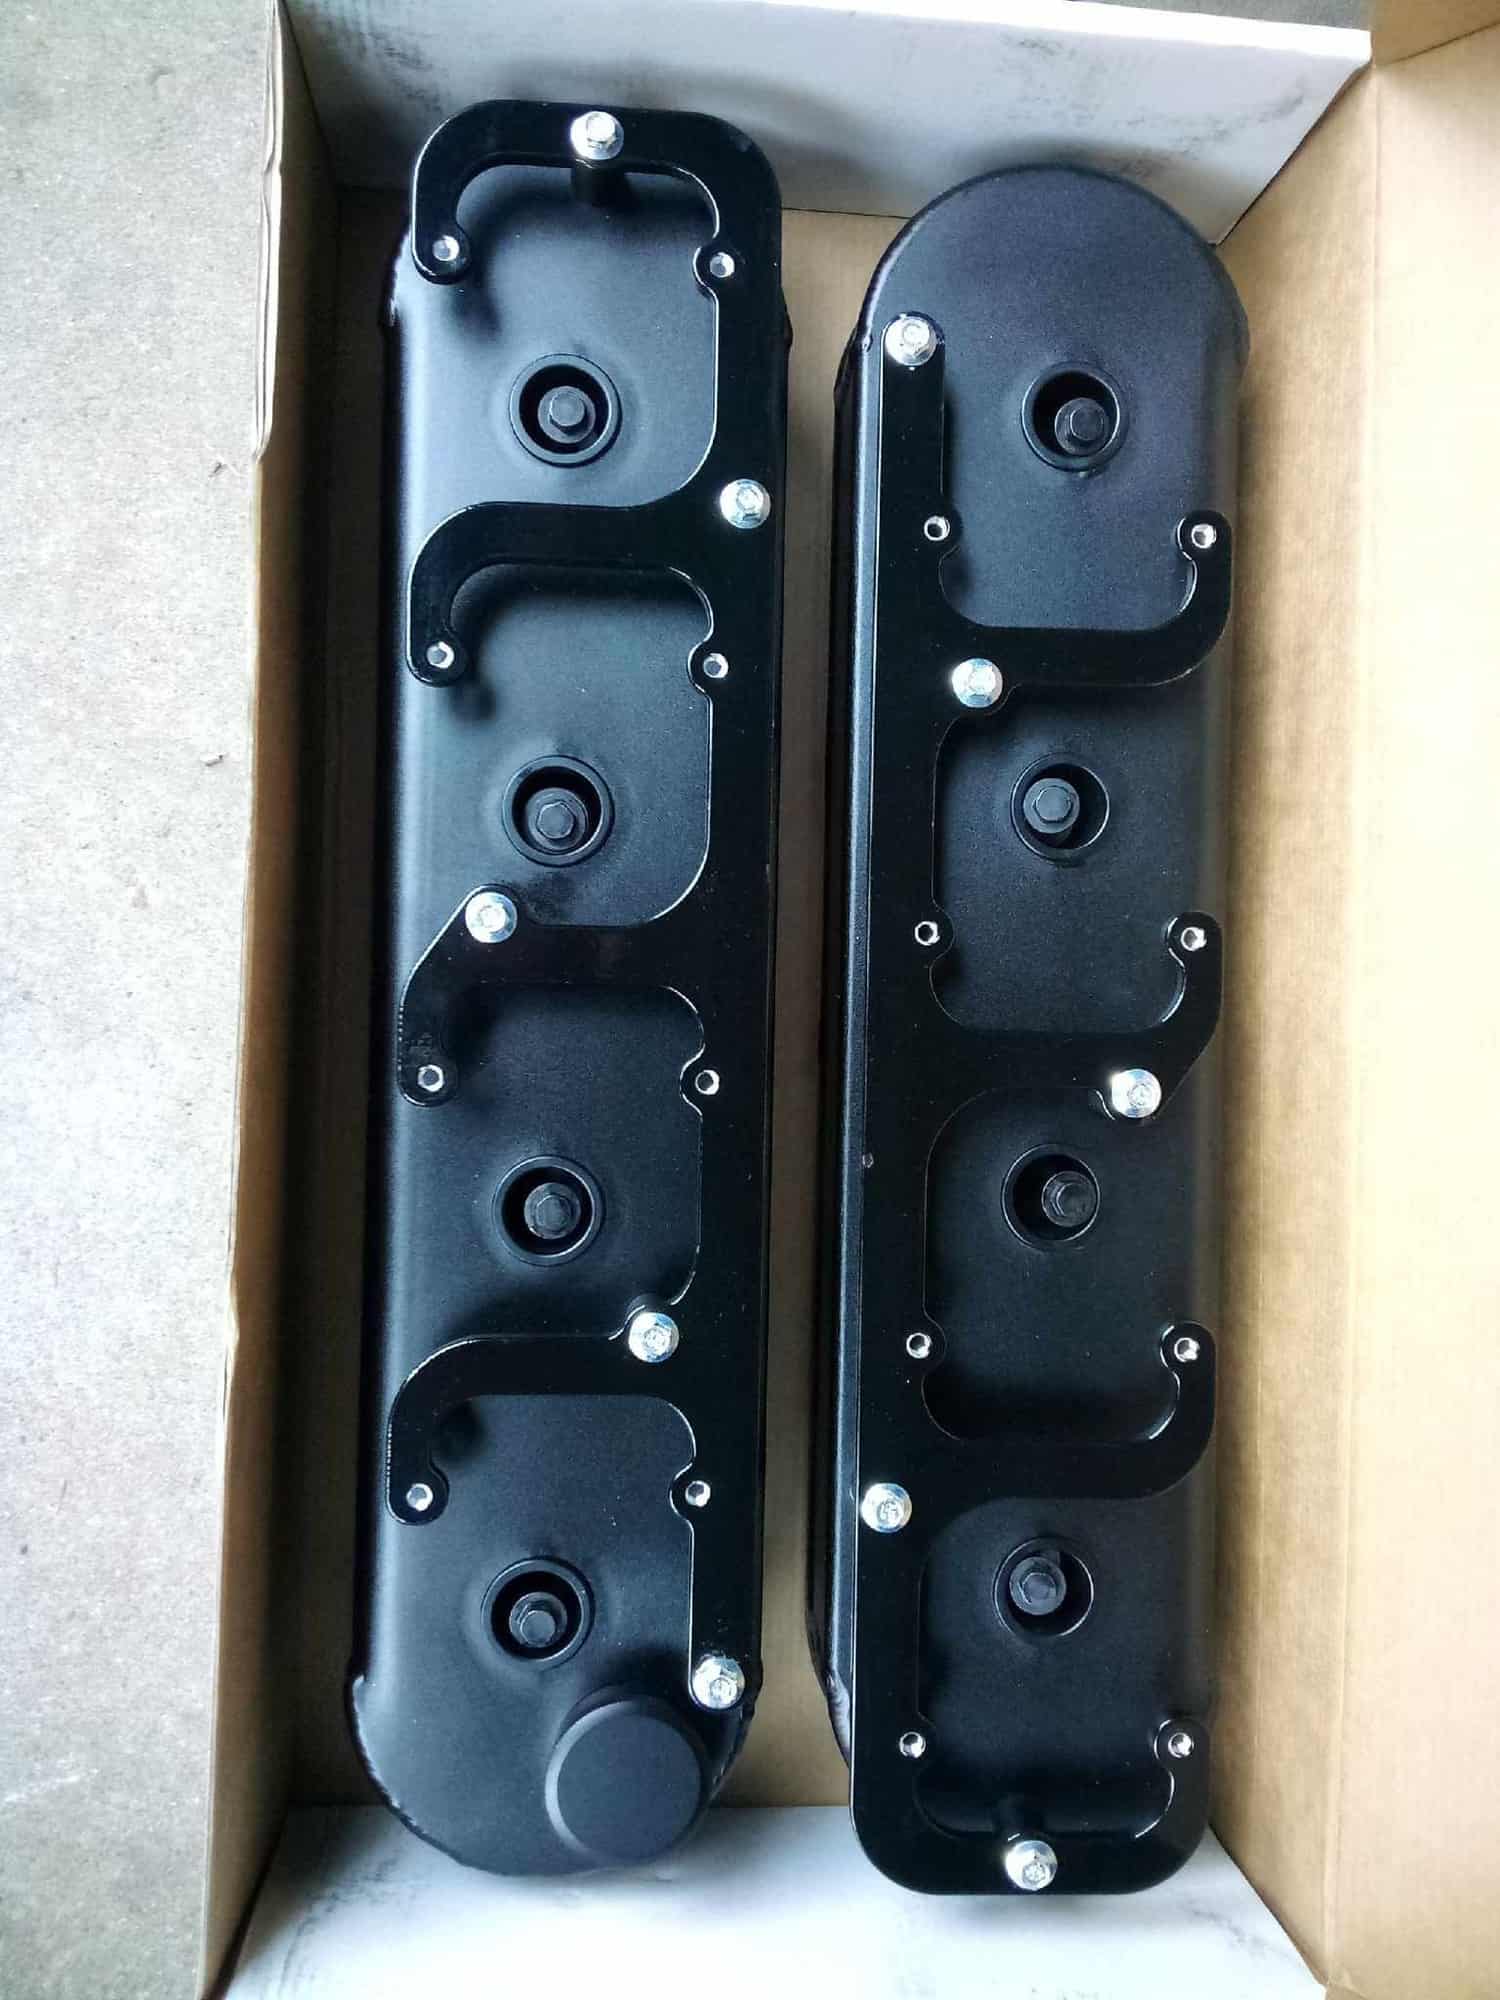 Accessories - Brand new fabricated valve covers and powdercoated ICT Billet coil brackets - New - All Years  All Models - Grand Rapids, MI 49519, United States